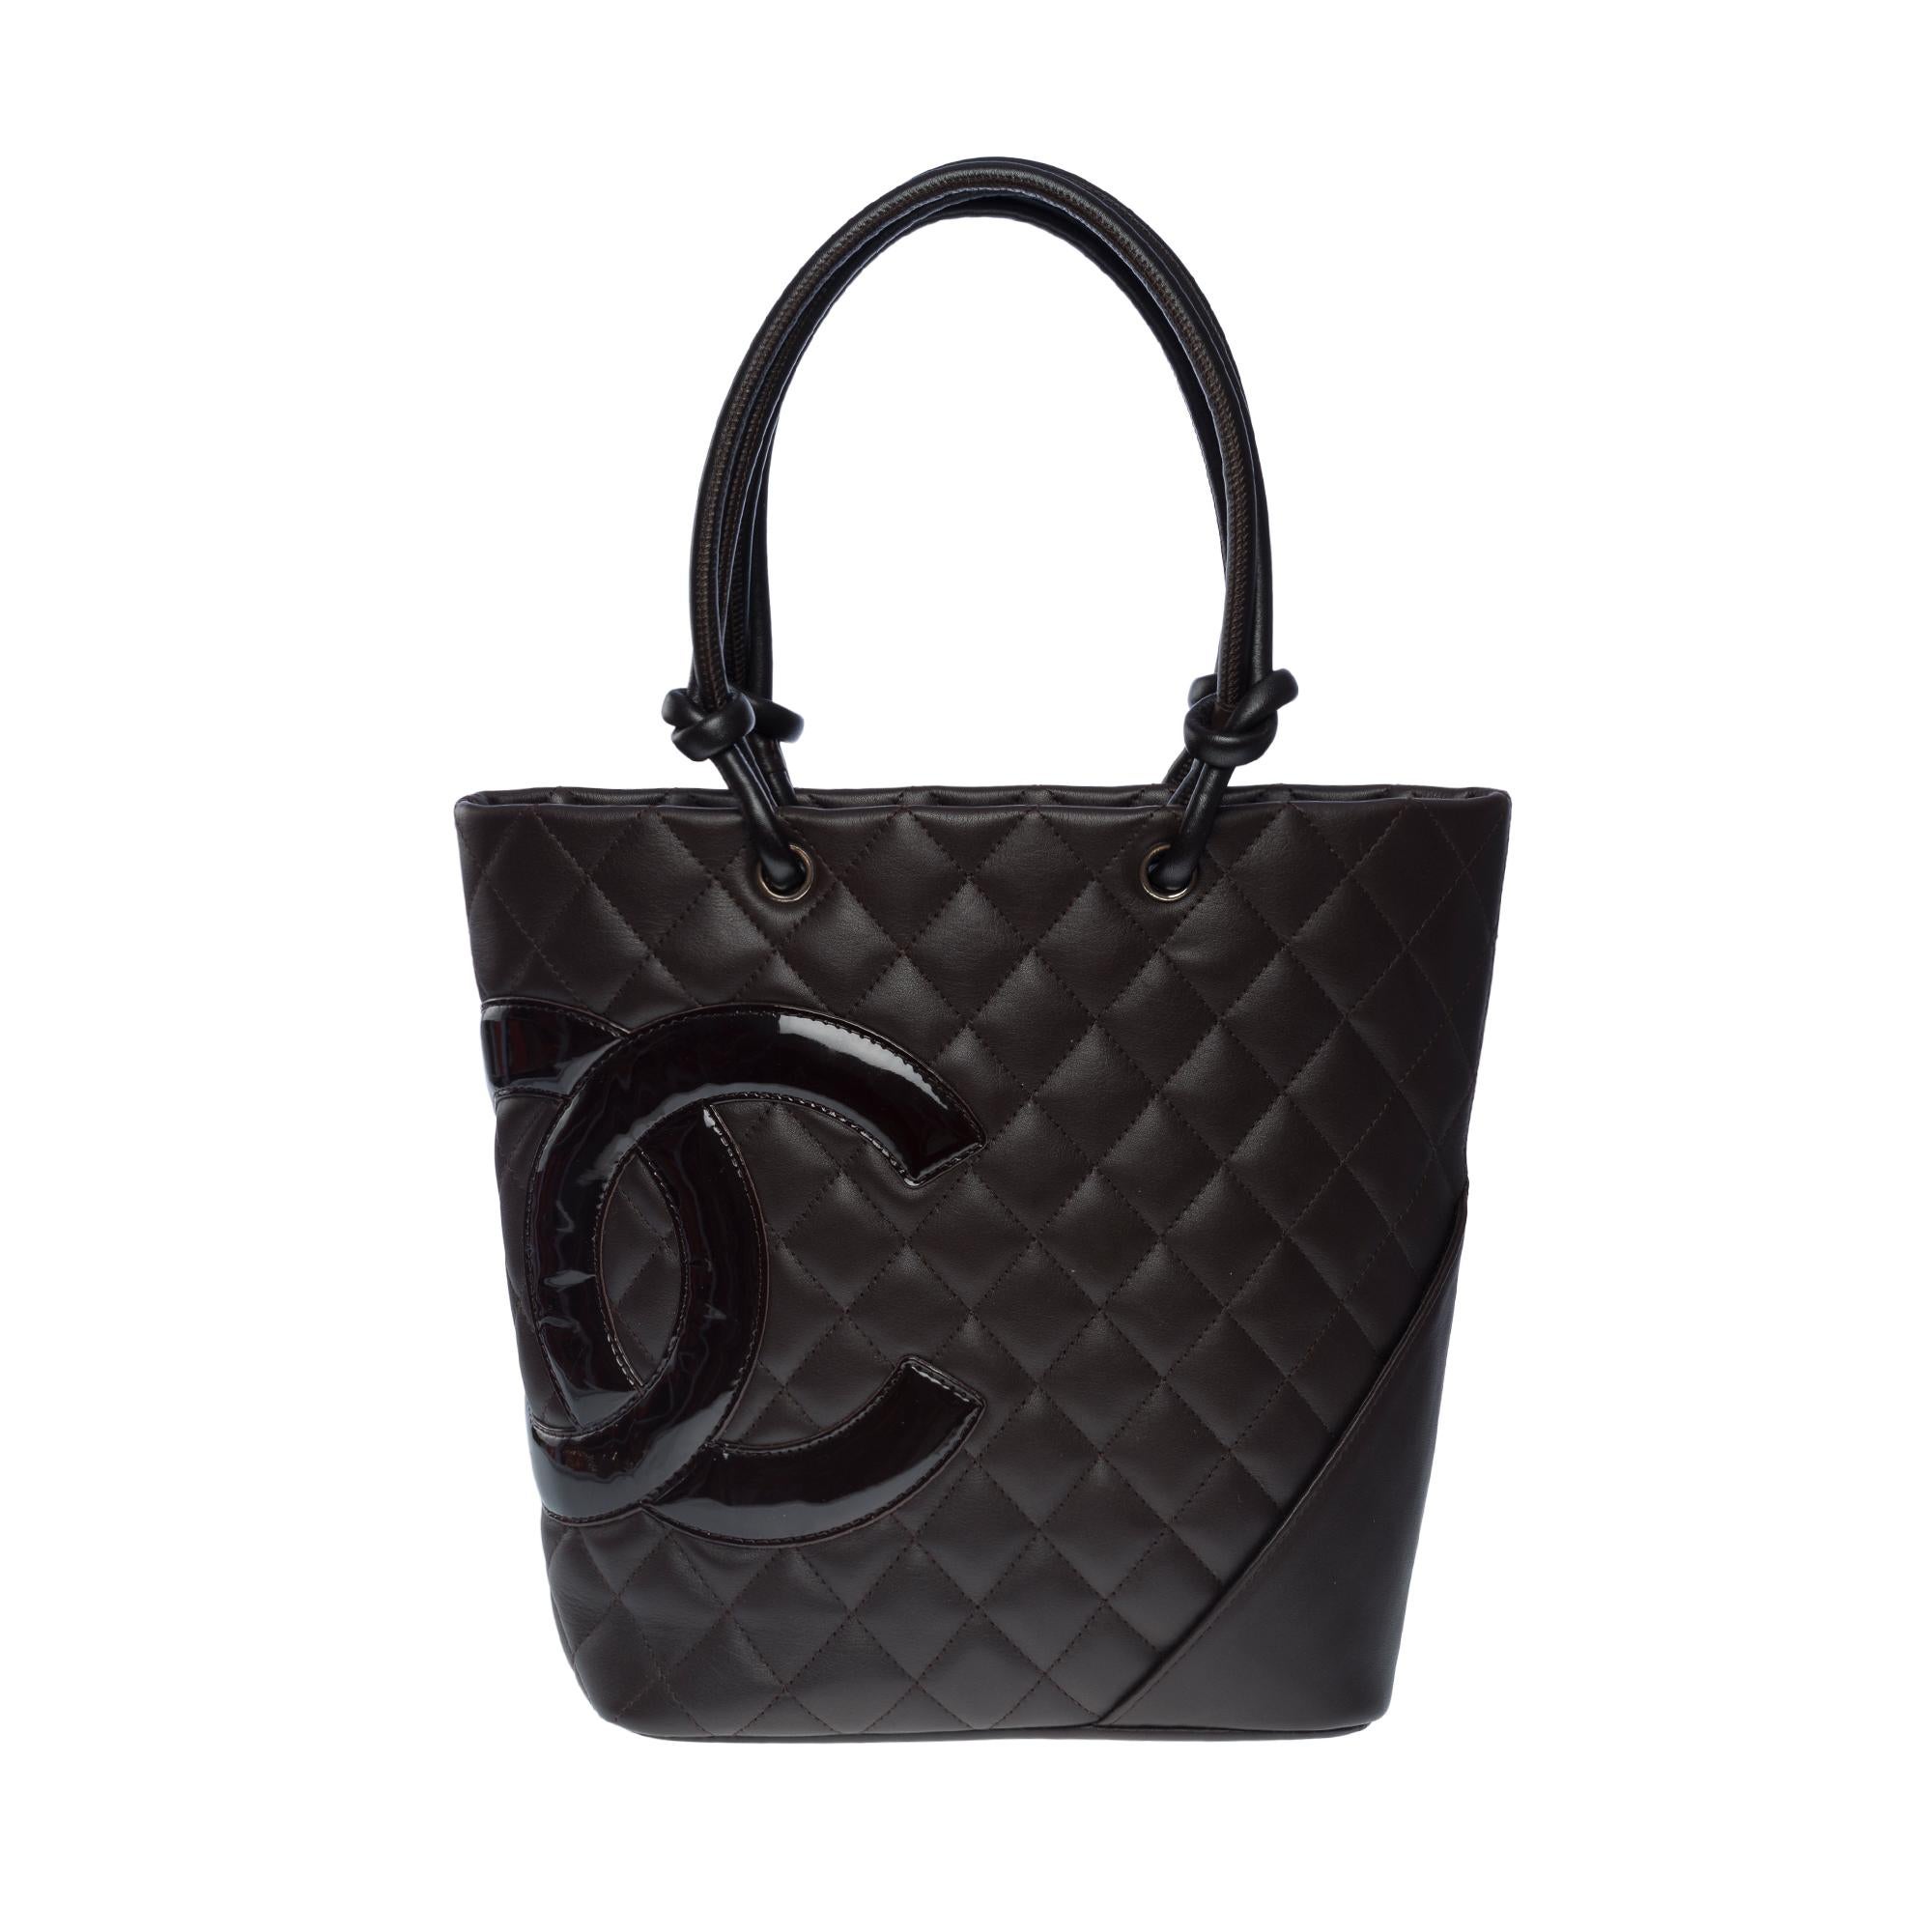 Stunning Chanel Cambon Tote bag in brown quilted lambskin leather, silver metal hardware,
Double brown leather handle for hand or shoulder carry
Zipper
CC brand orange fabric inner lining, two zip pockets, two pen slots, one tie
Signature: